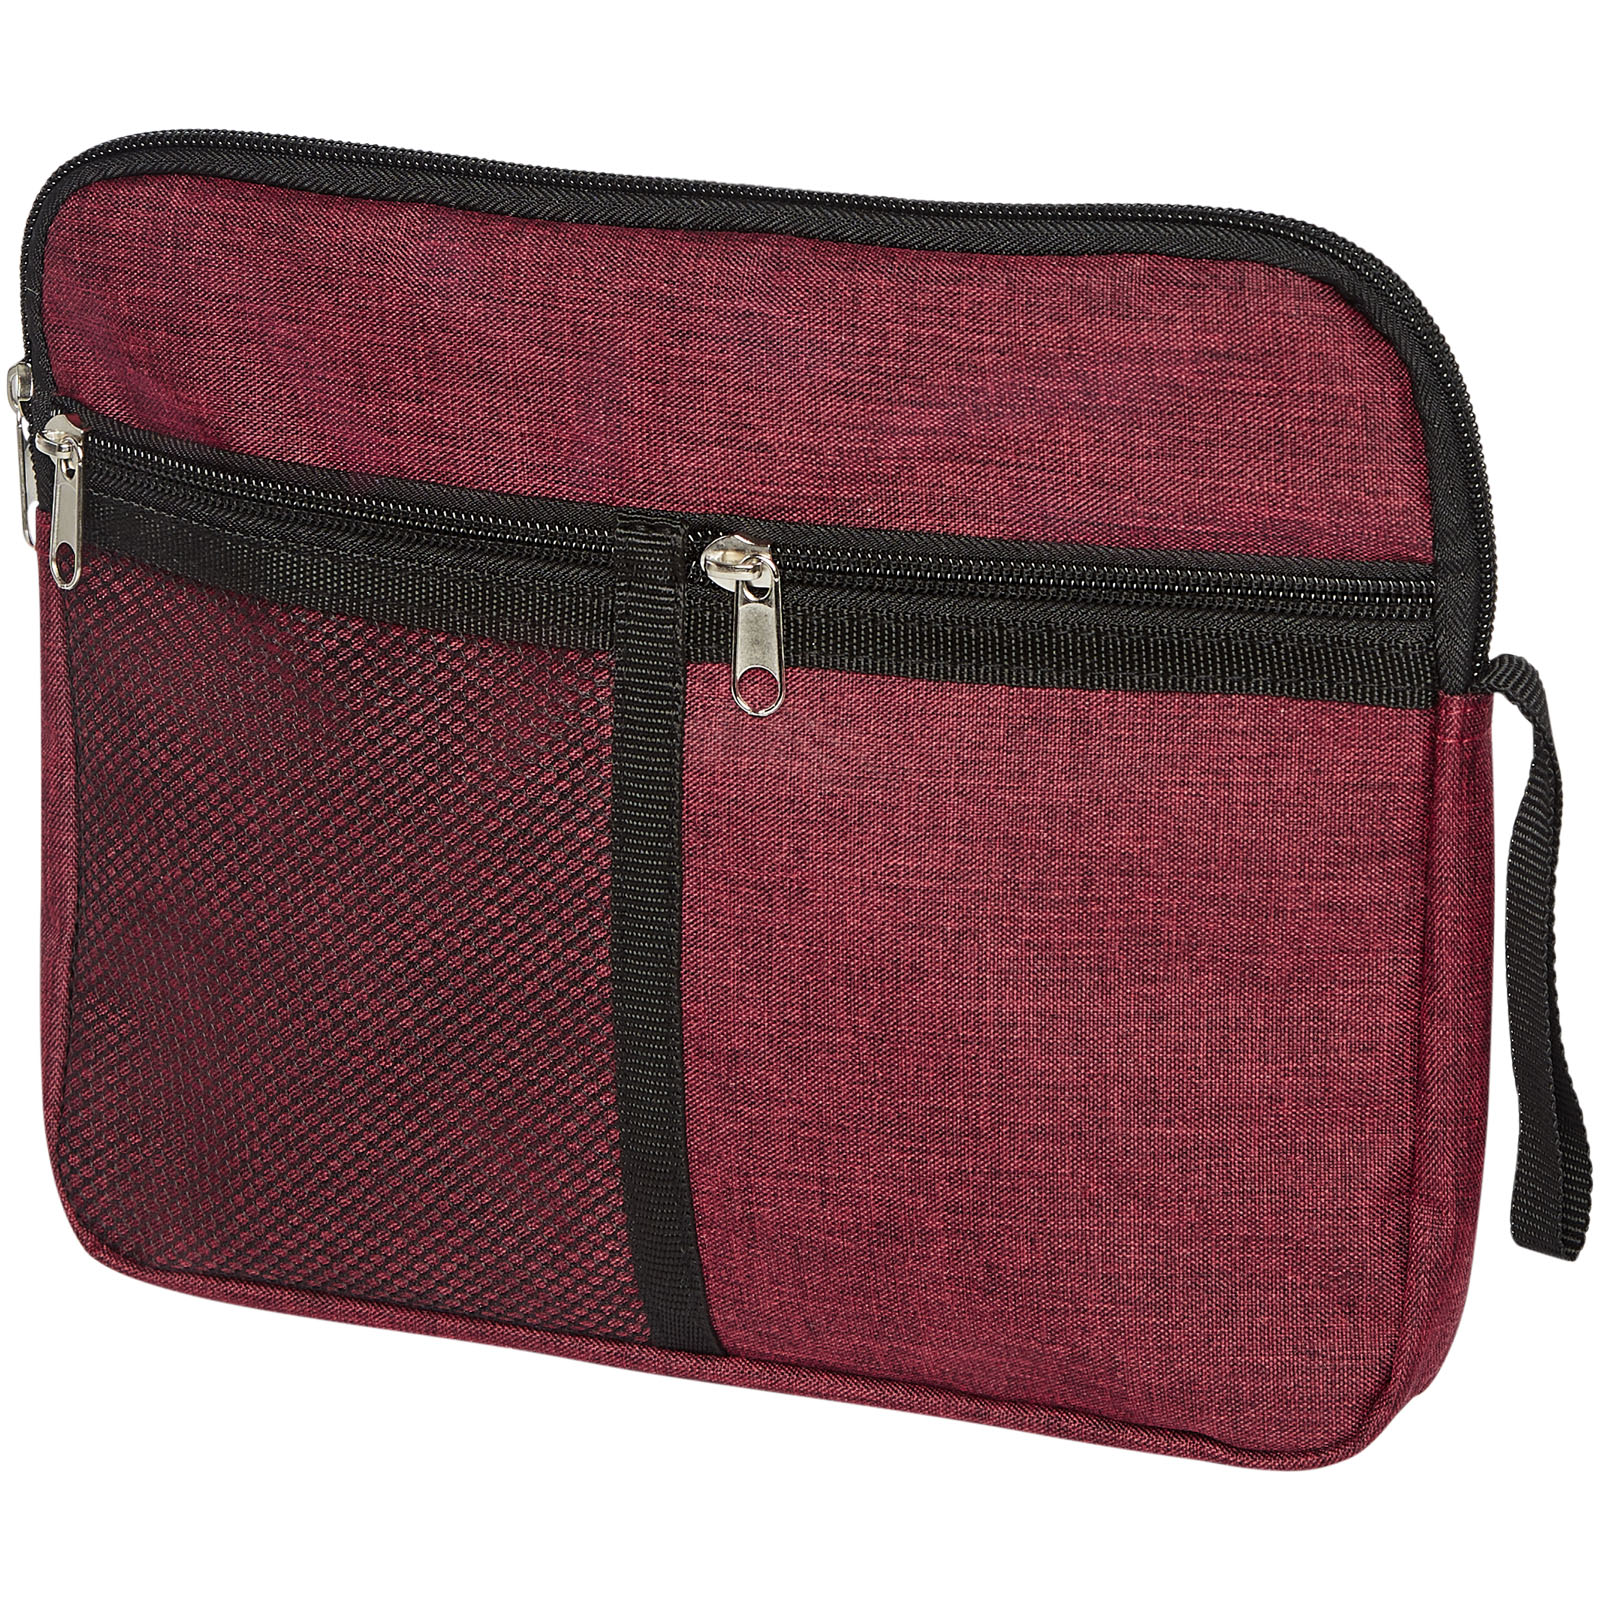 A toiletry bag with a heathered colour effect and a zippered closure - Newcastle-under-Lyme